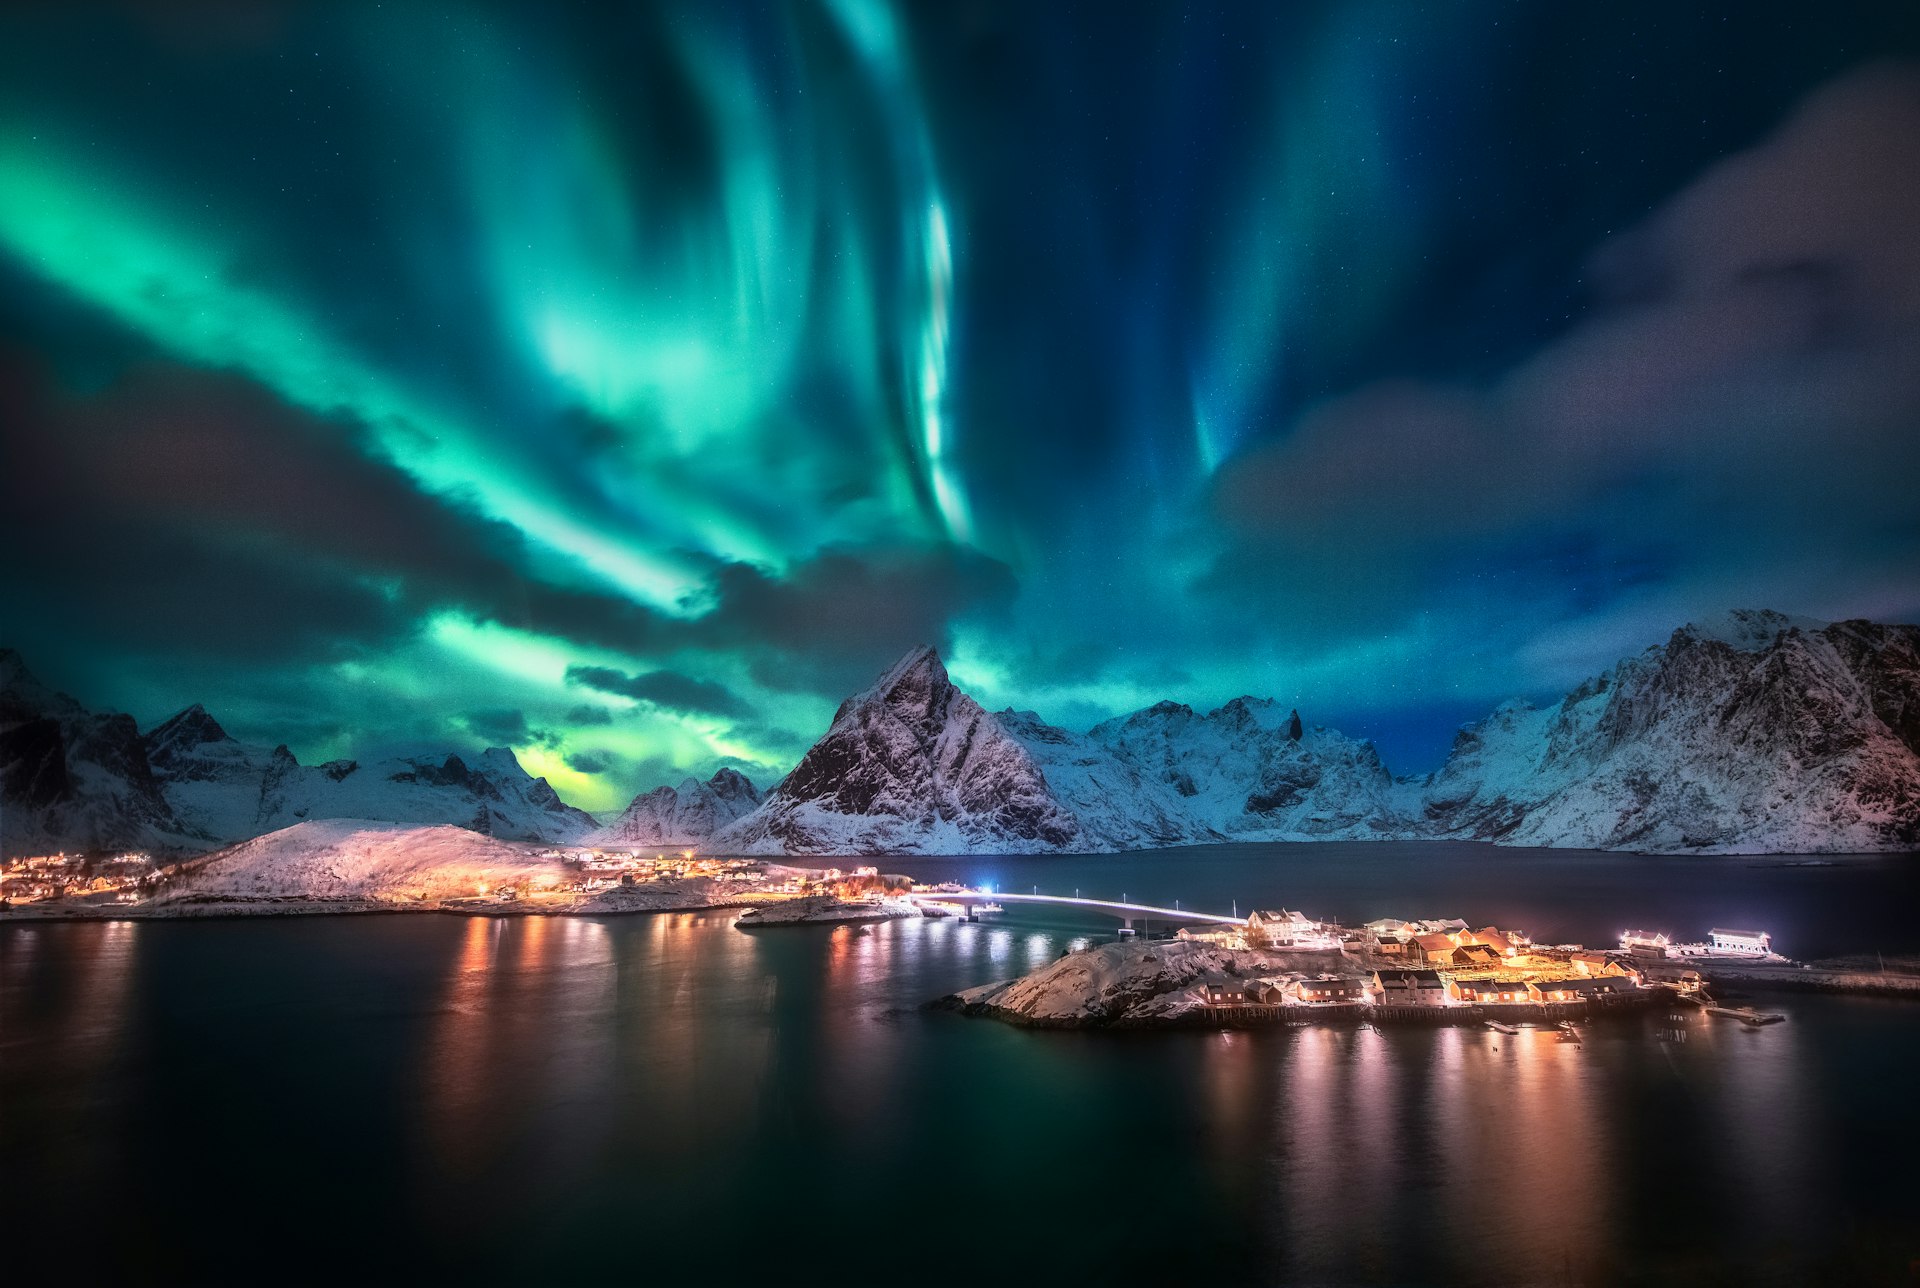 The green Aurora Borealis streak across the dark sky above the Lofoten Islands in Norway. A snowy mountainscape is visible beneath the light show.